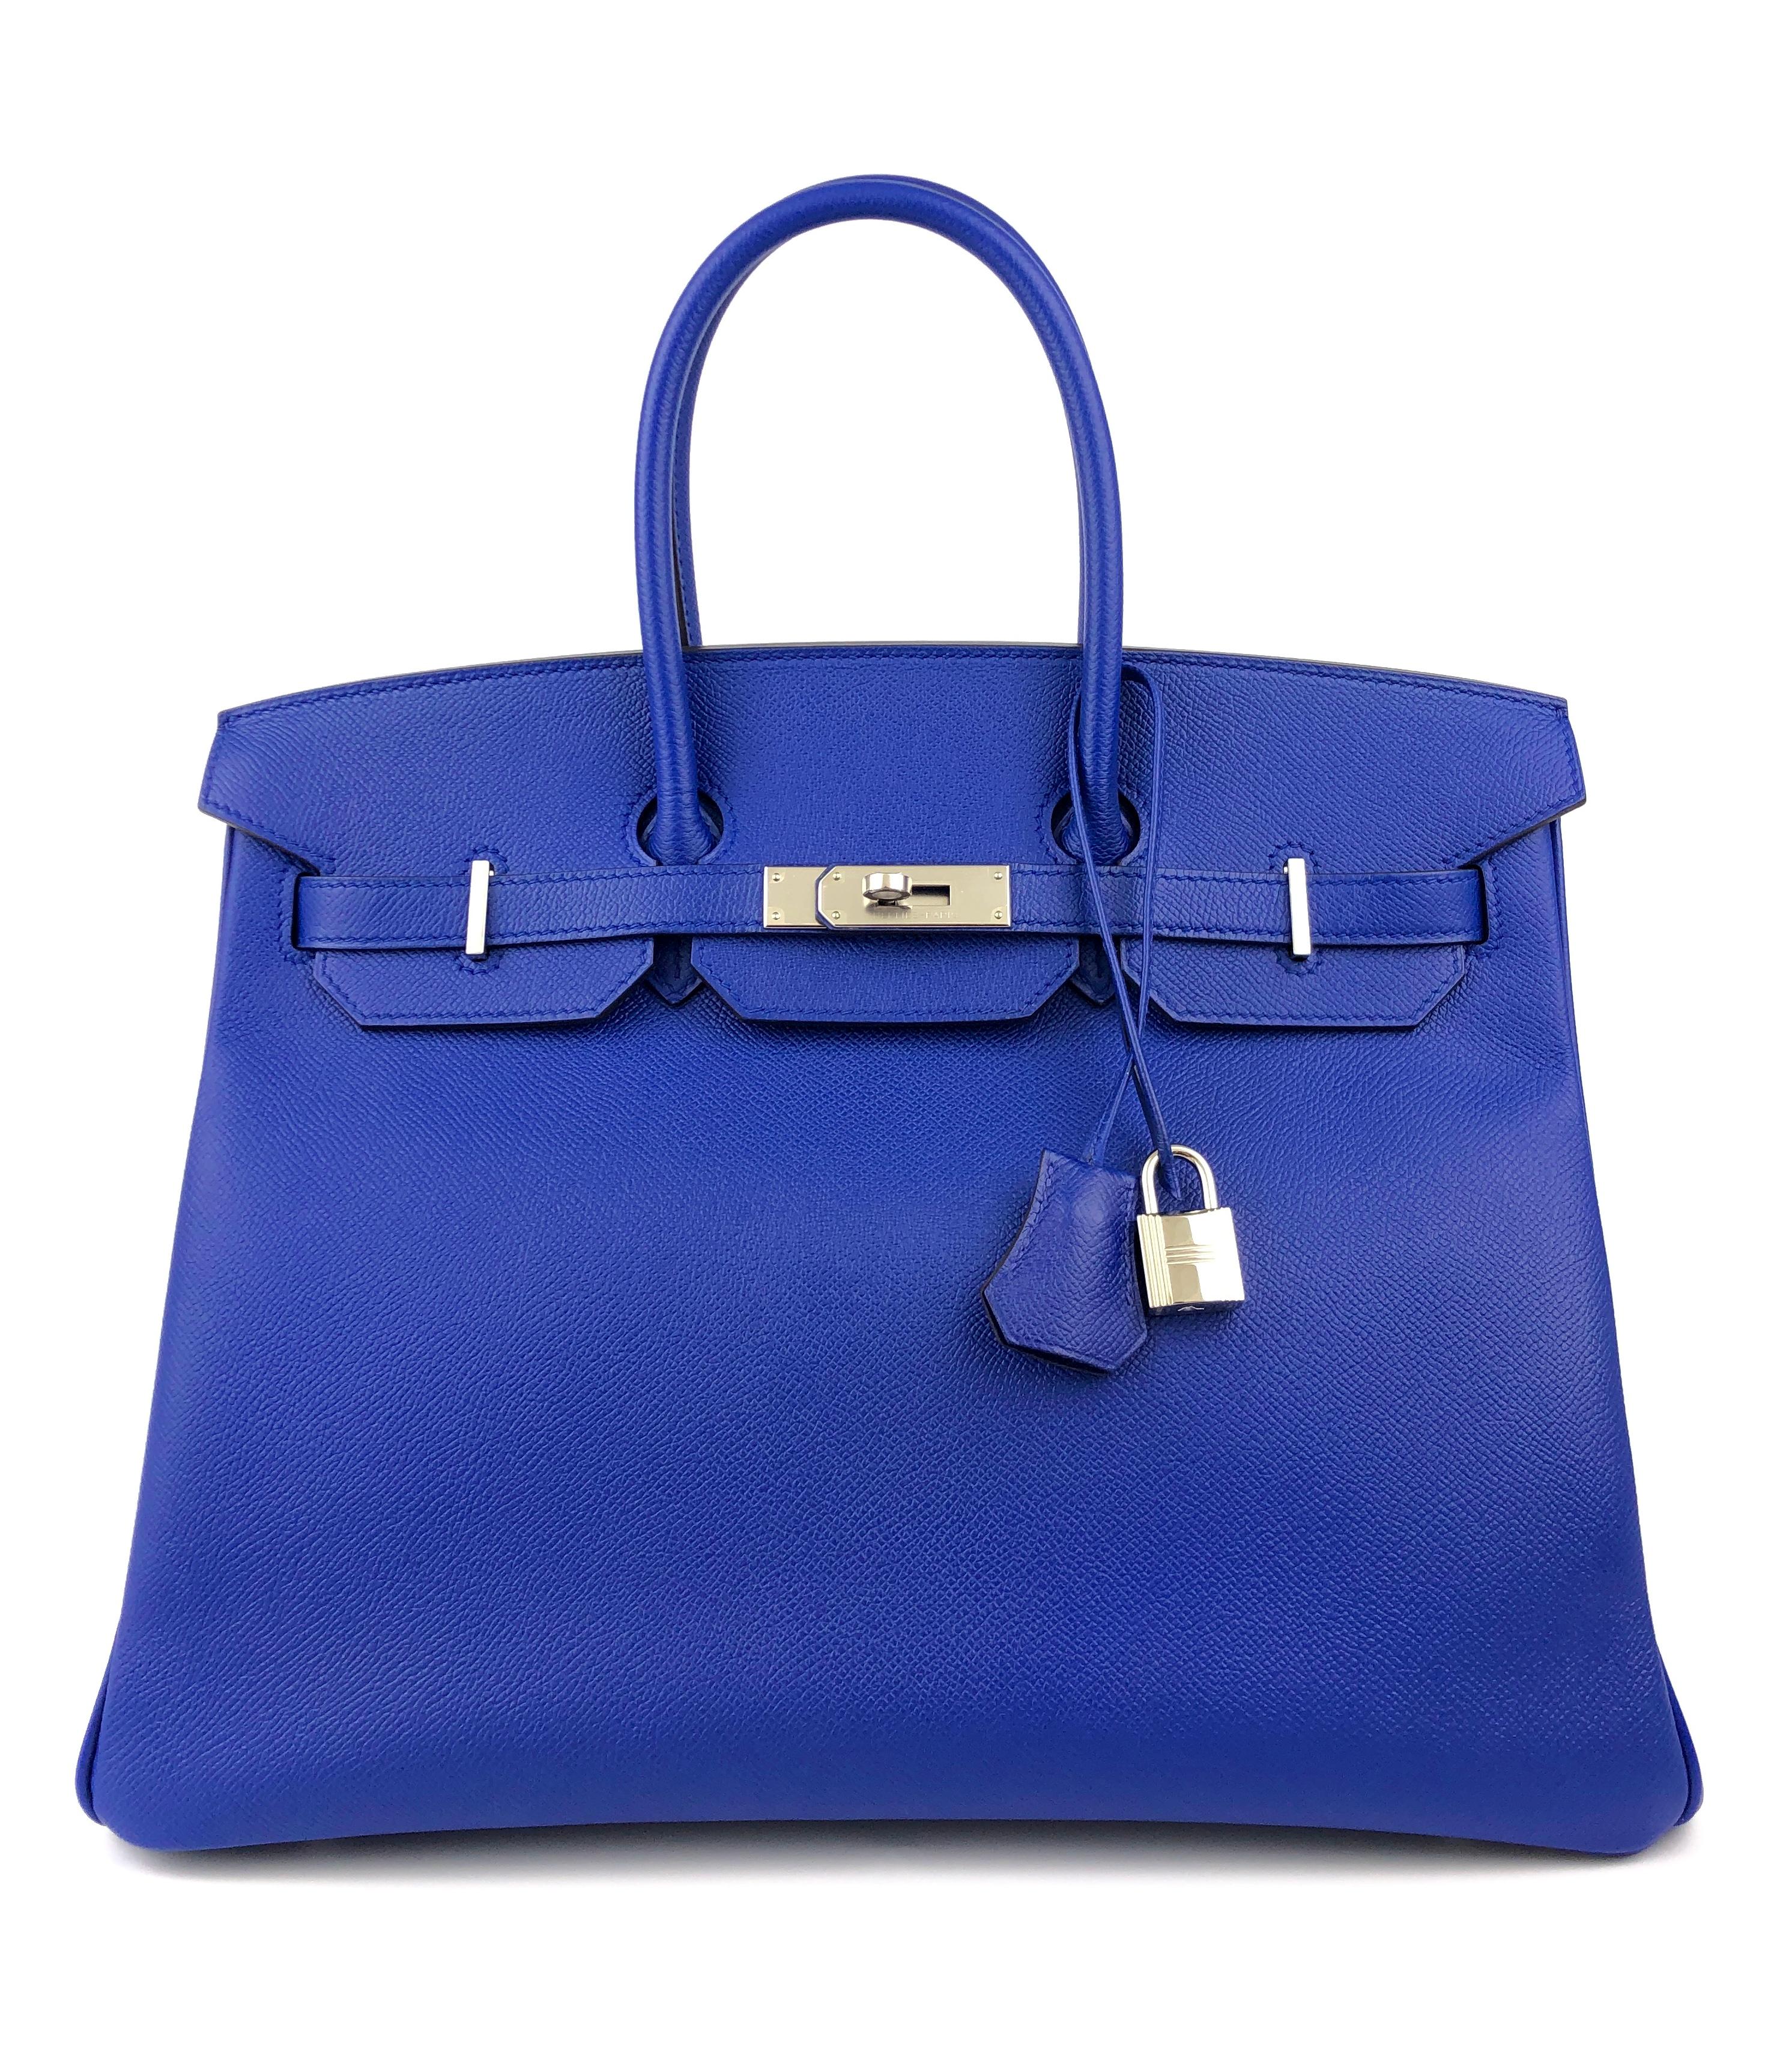 Stunning Hermes Birkin 35 Blue Electric Epsom Palladium Hardware.  Pristine Condition, Plastic on Hardware and Feet. Excellent corners and Structure. R Stamp 2014.

Shop with Confidence from Lux Addicts. Authenticity Guaranteed!